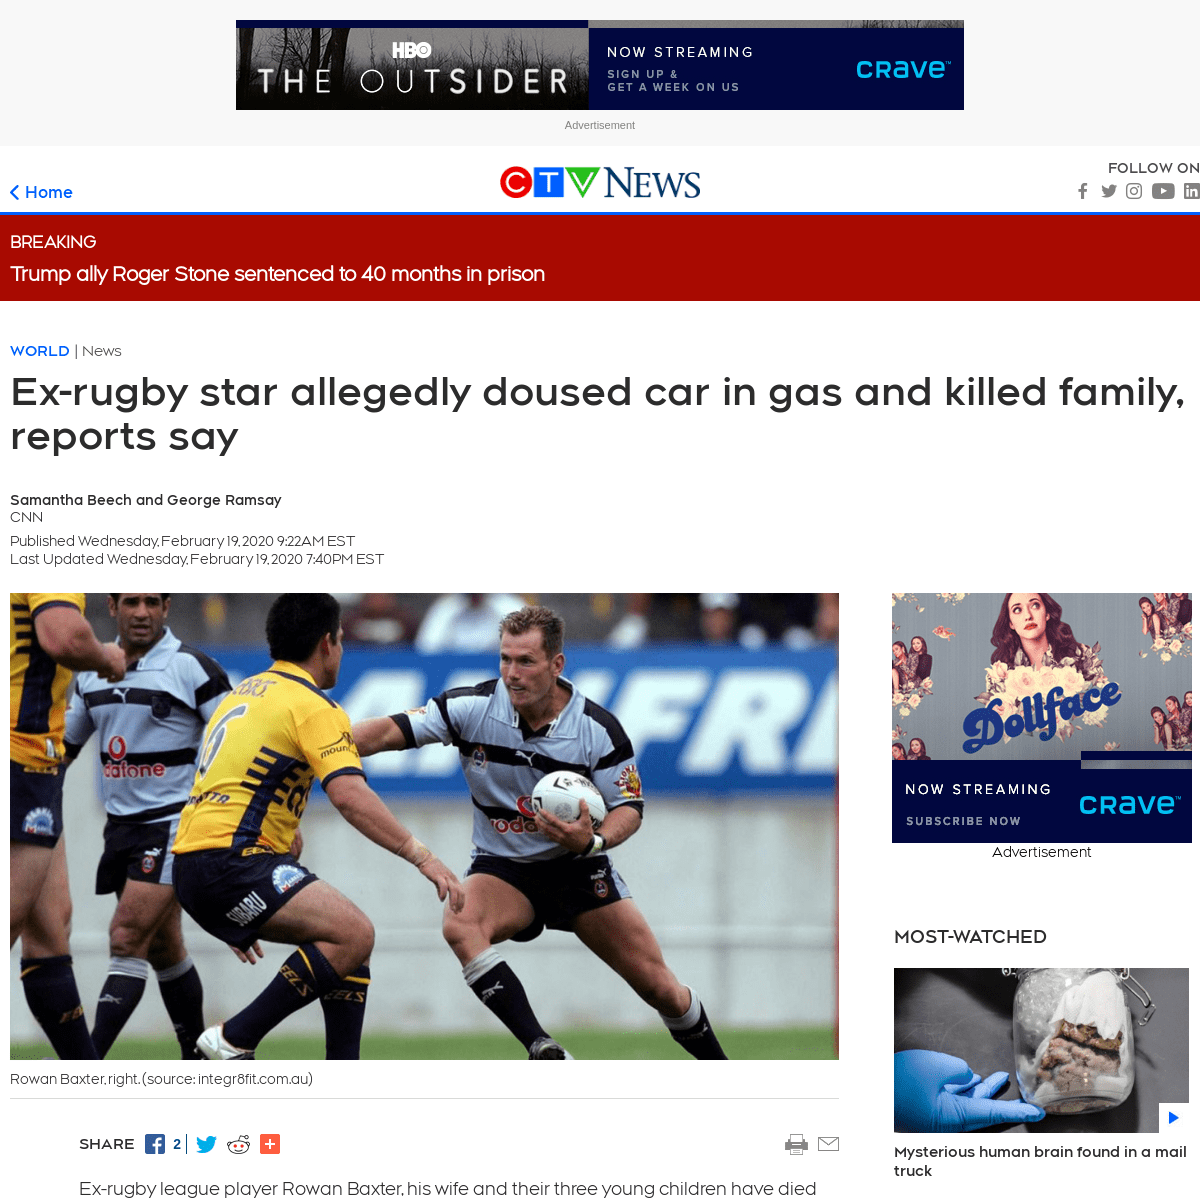 A complete backup of www.ctvnews.ca/world/ex-rugby-player-wife-and-three-children-die-in-horrific-vehicle-fire-1.4818279